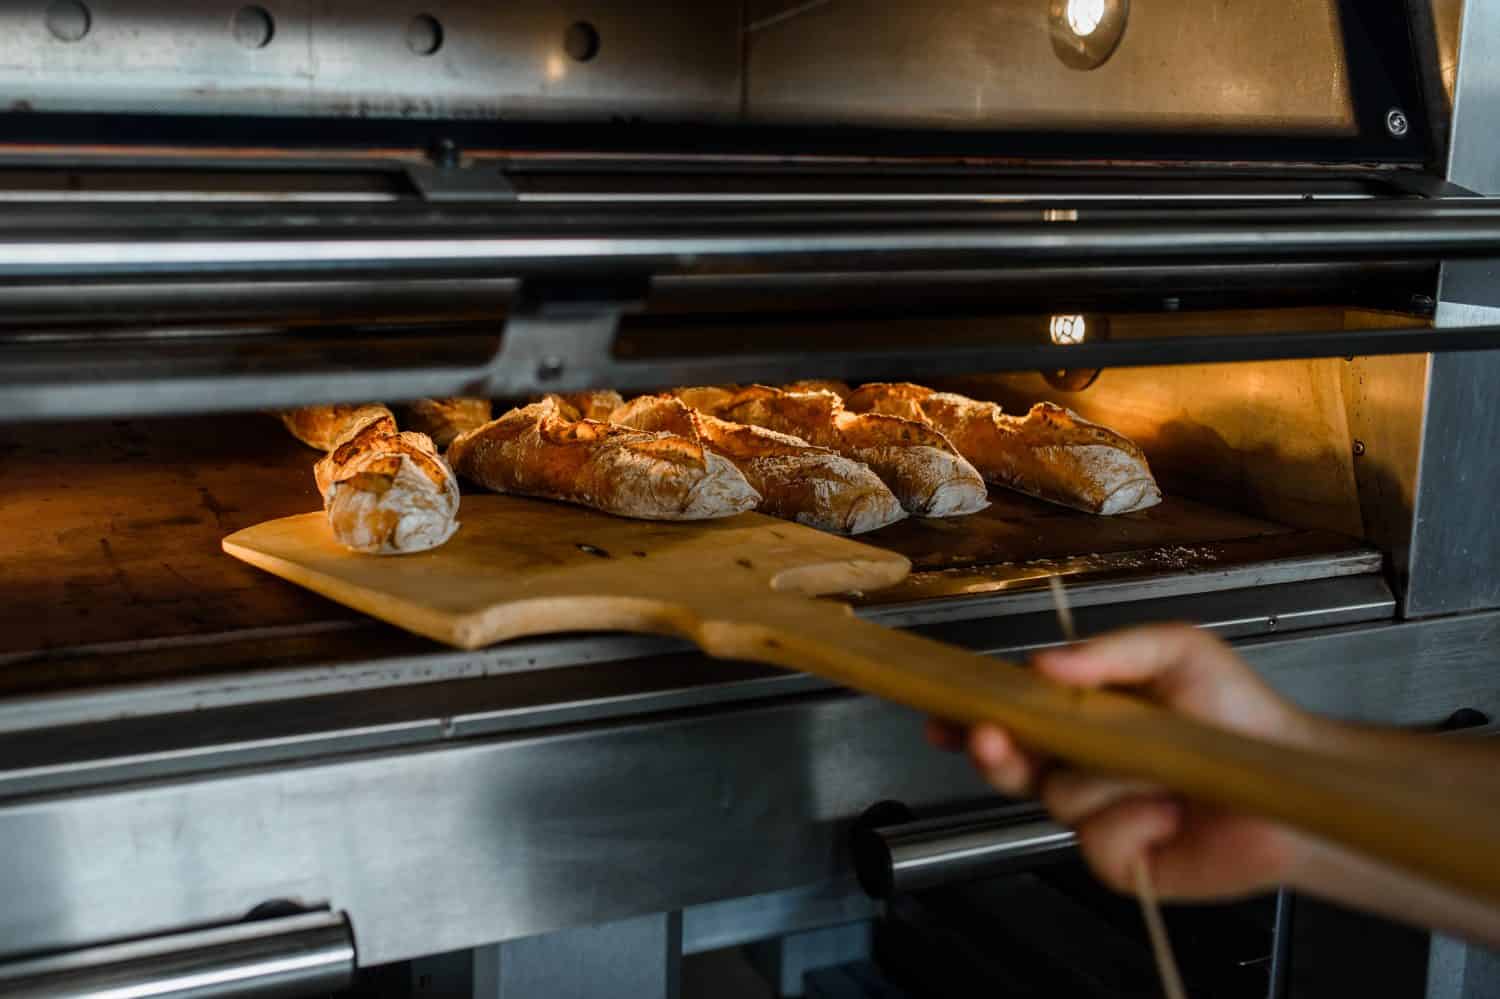 Freshly-baked baguettes being taken from oven